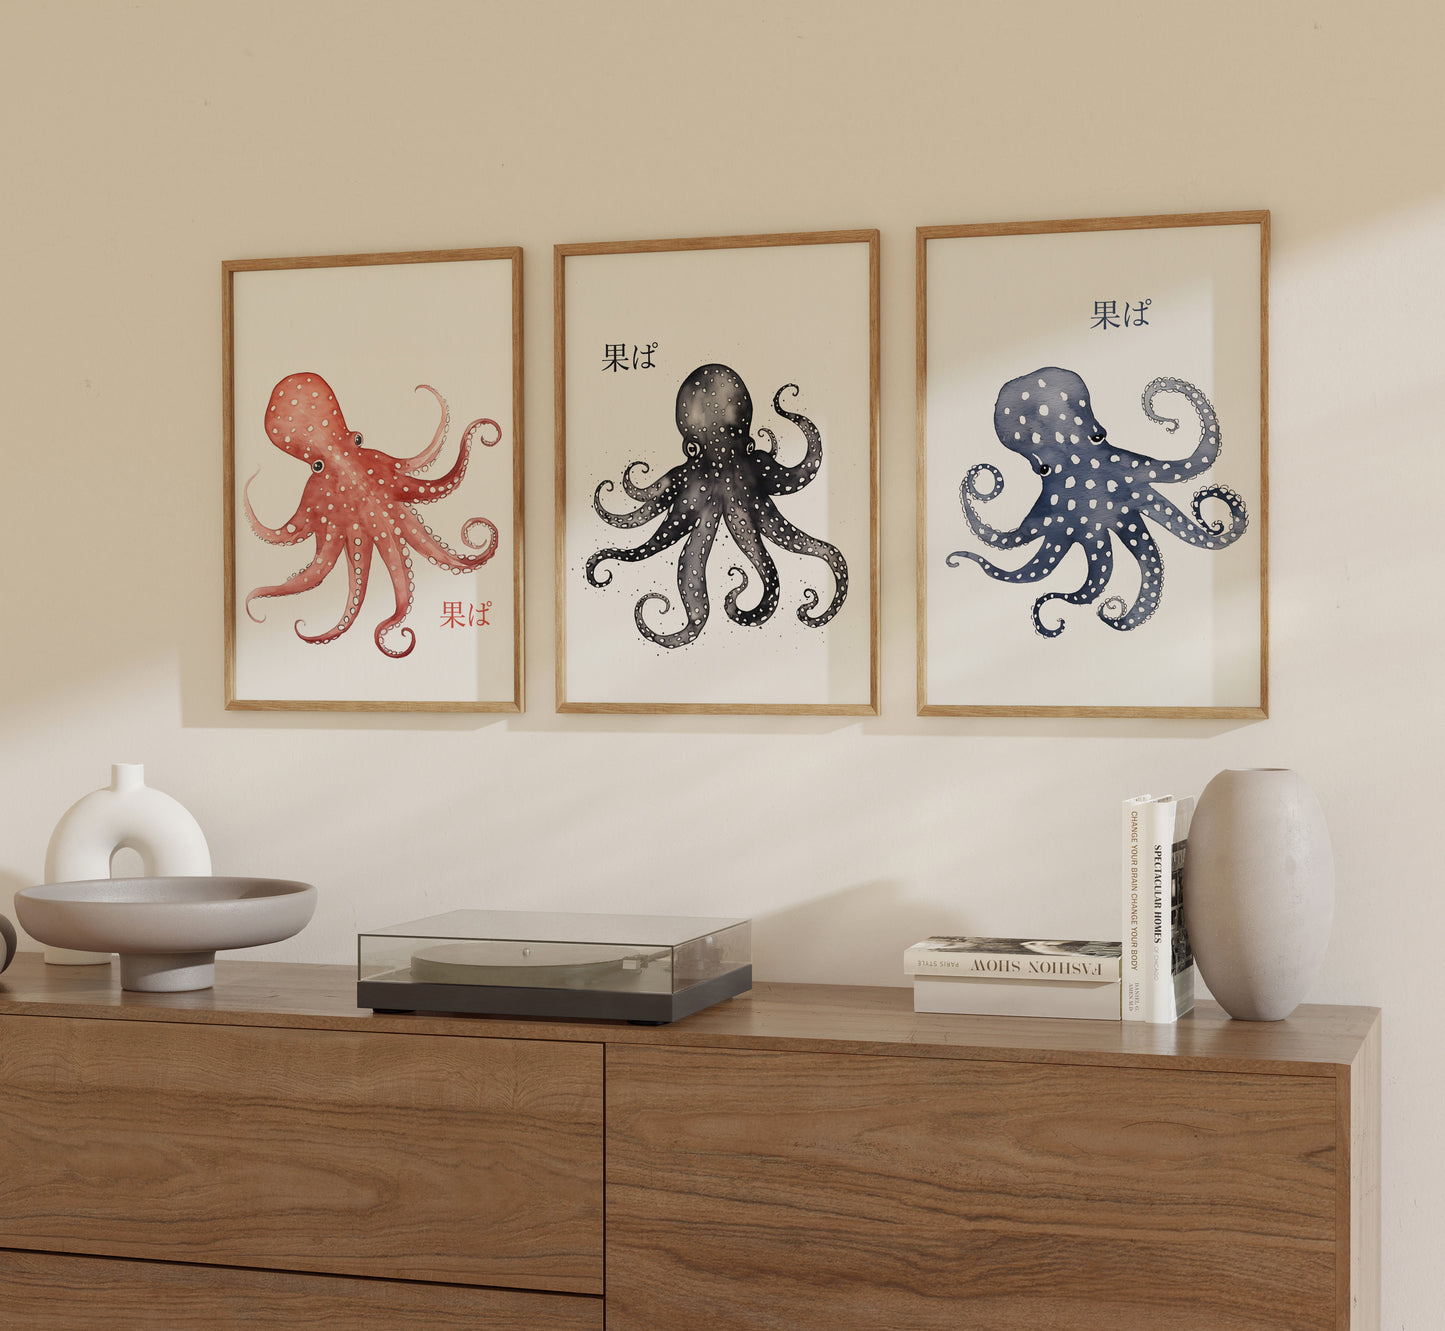 Three framed pictures of octopuses in red, black, and blue on a wall above a wooden sideboard.